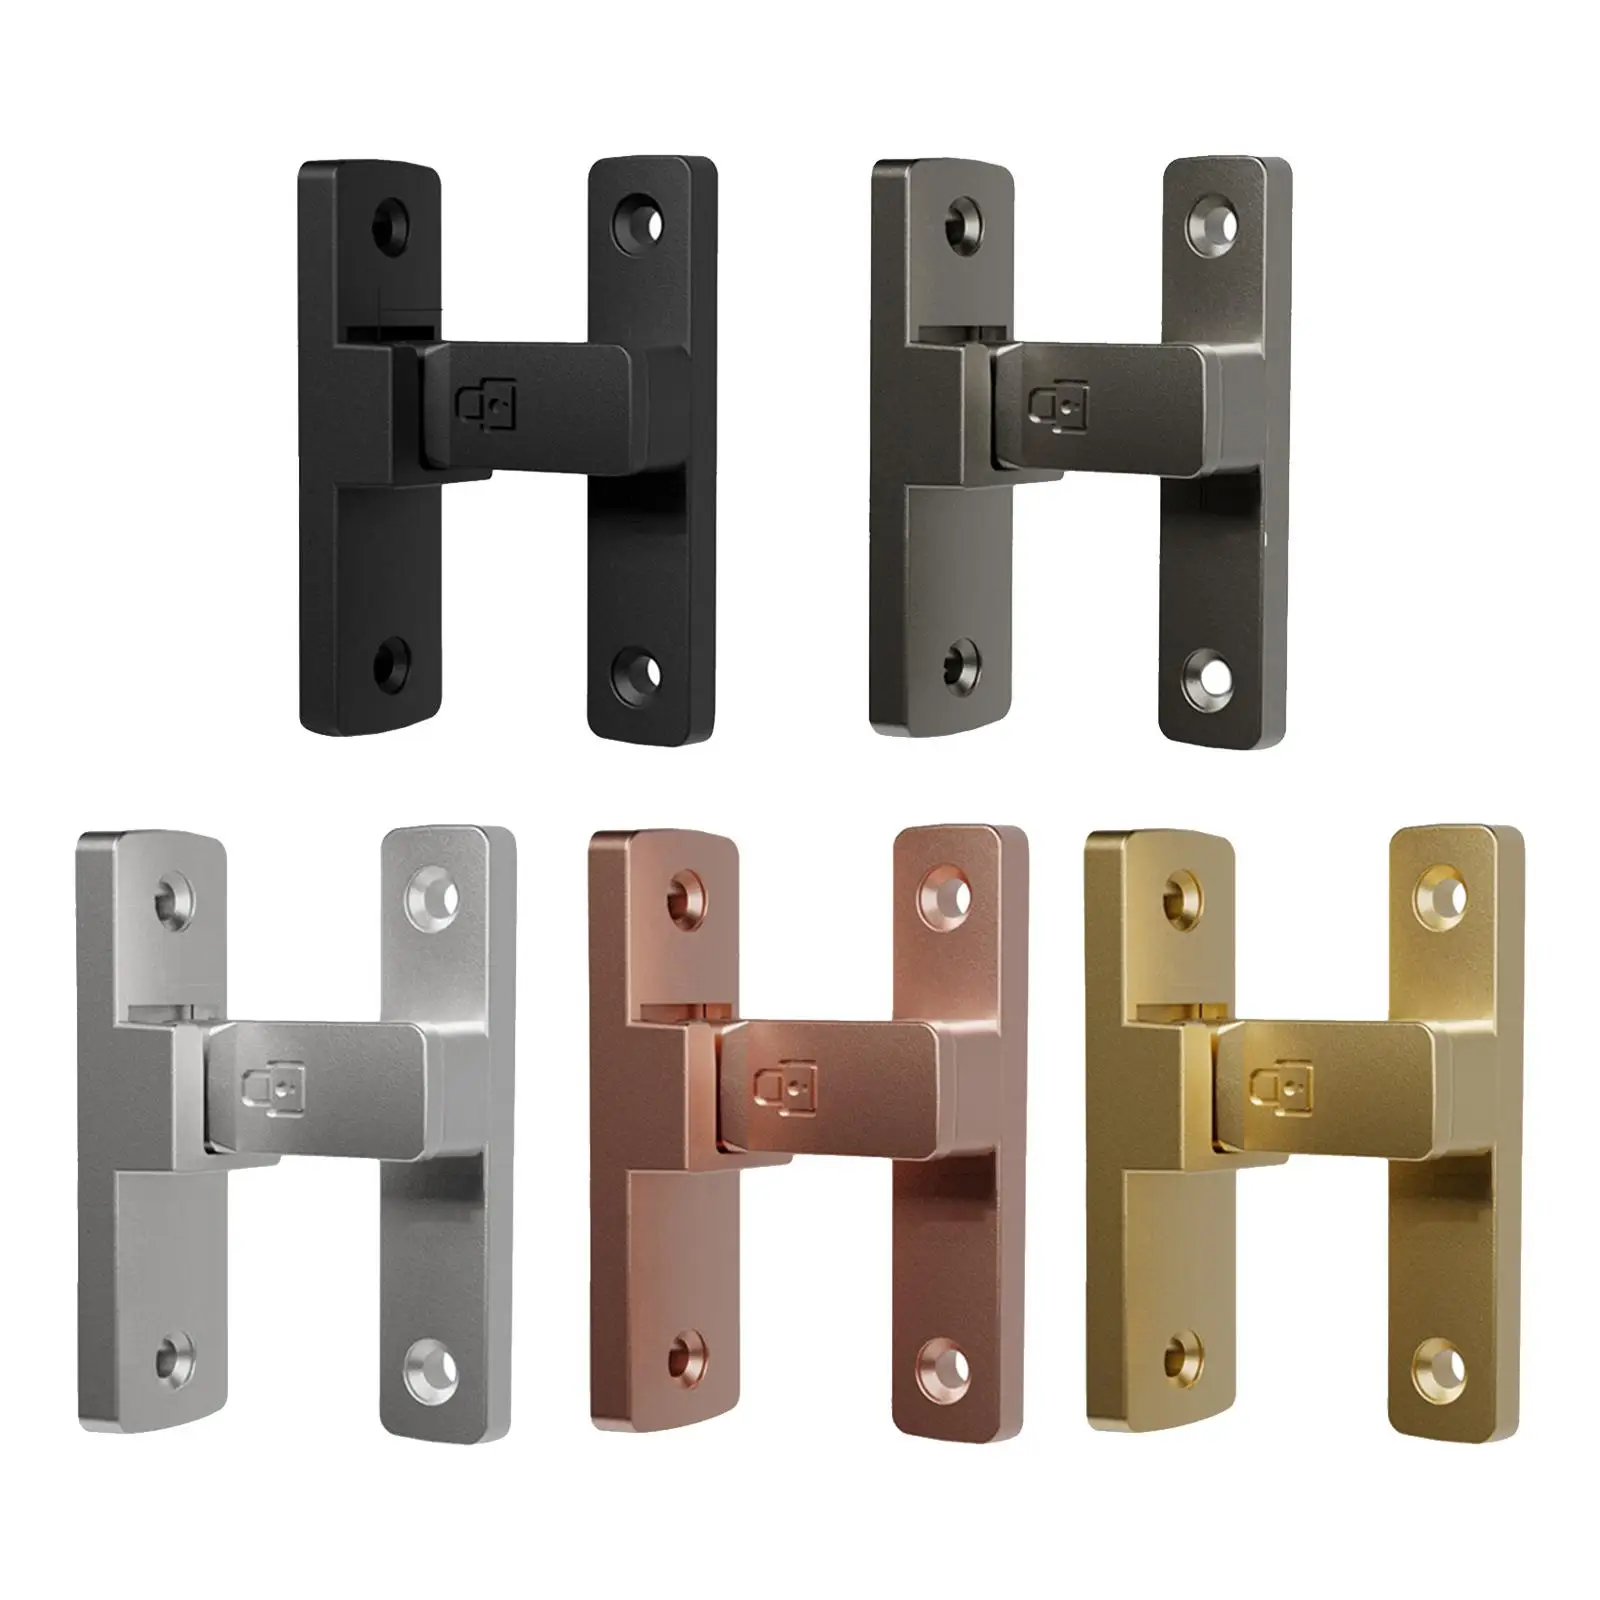 90 Degree Door Latch Guard with Screws Safety Door Lock for Hotel Cabinets